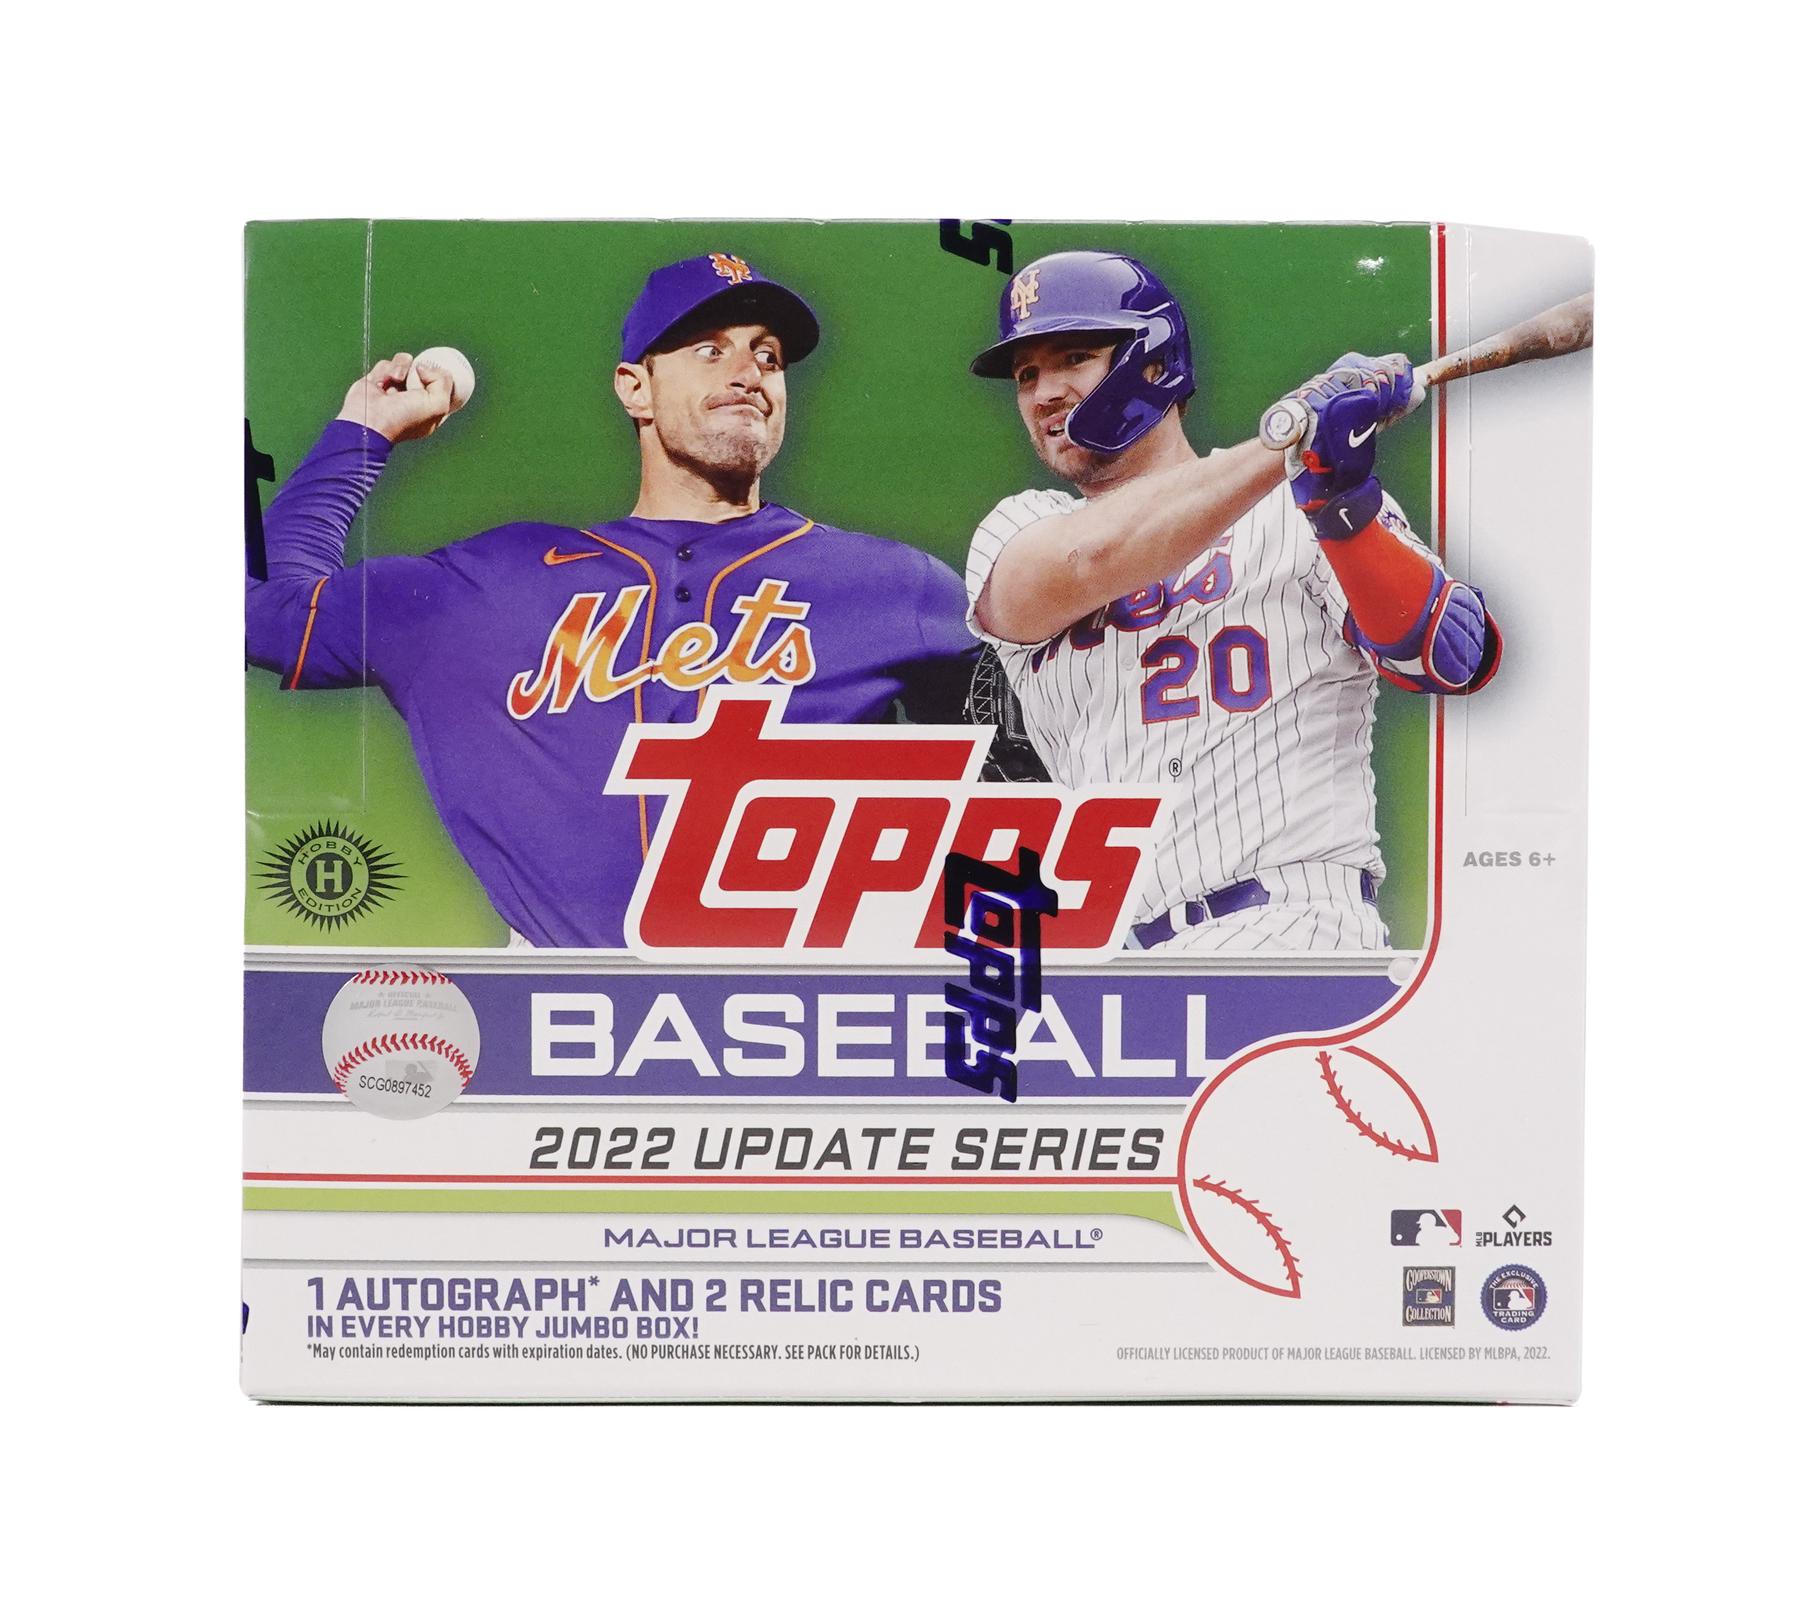 2018 Topps Update Series Baseball Checklist, Variations, Boxes